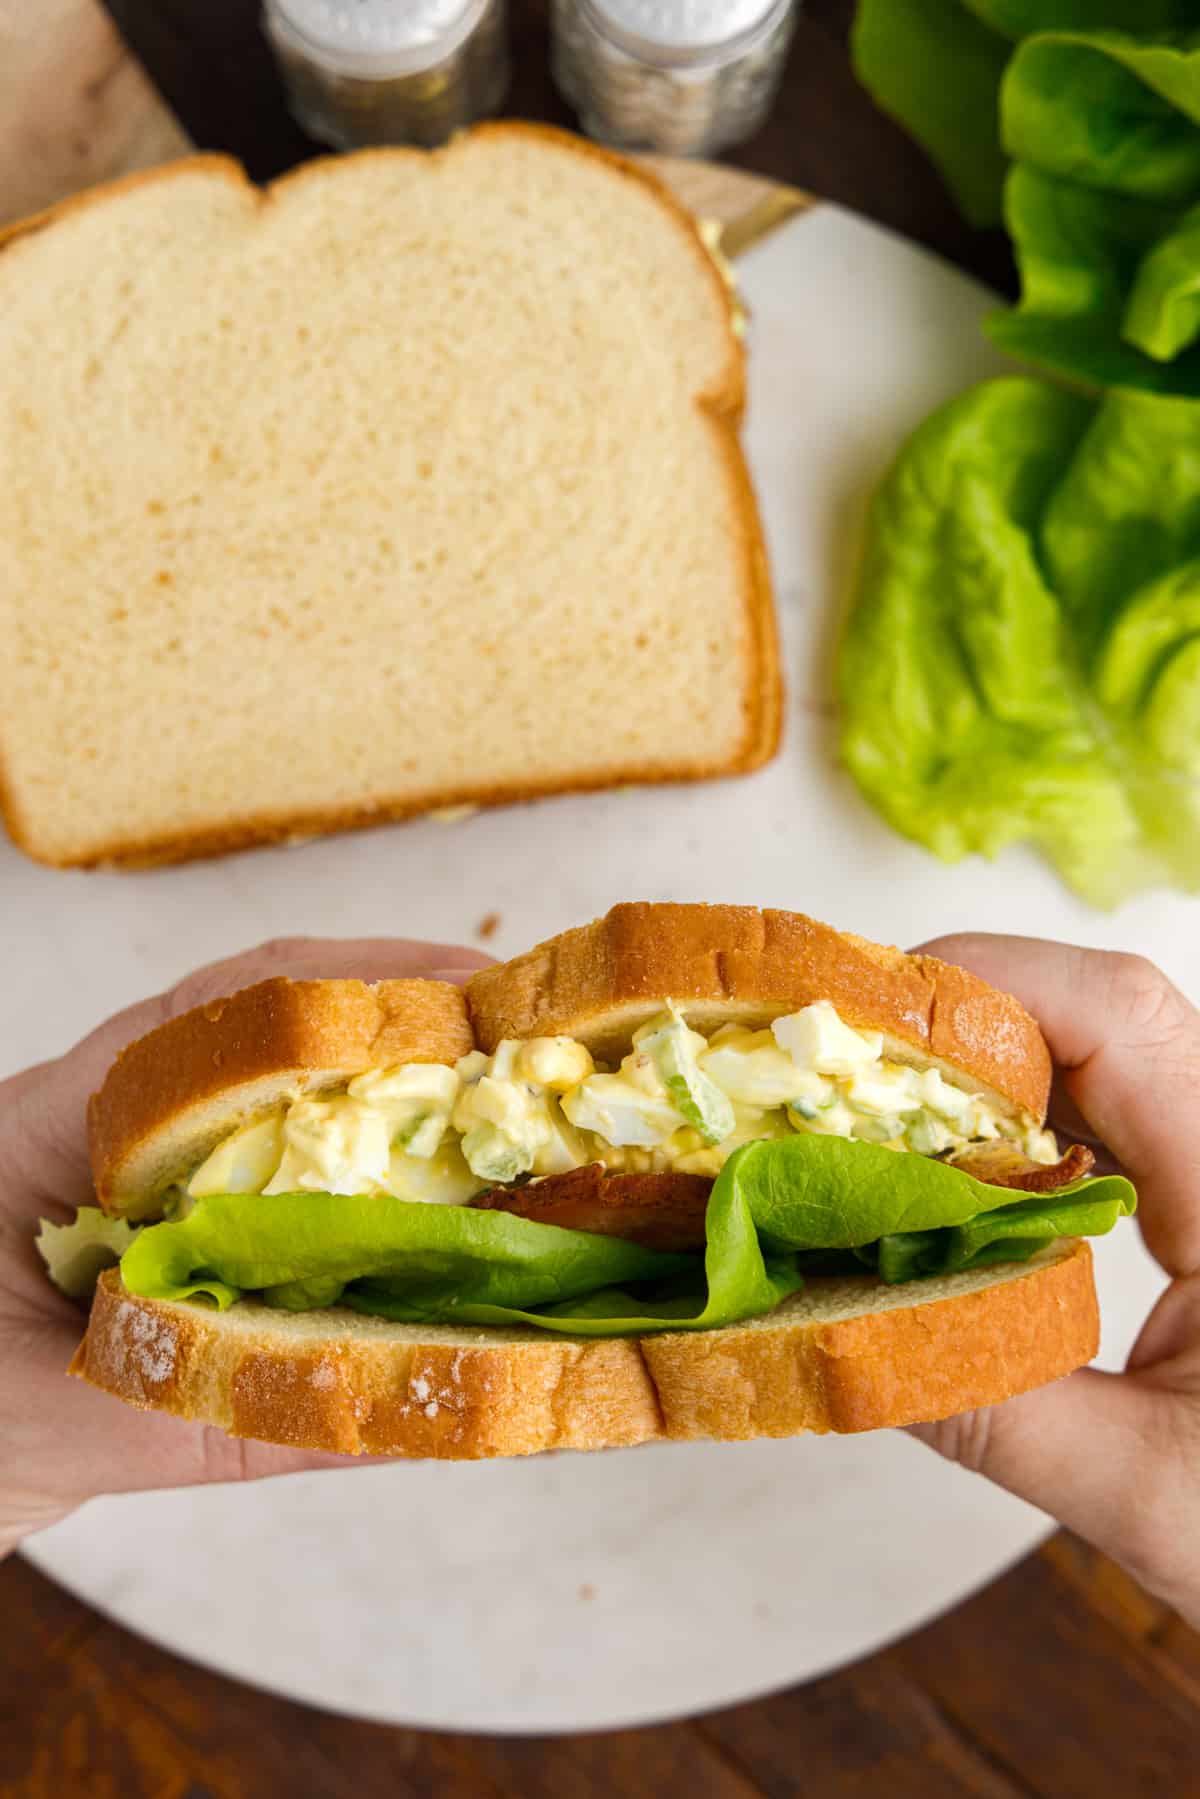 Hands holding an egg salad sandwich with lettuce and bacon on sandwich bread.